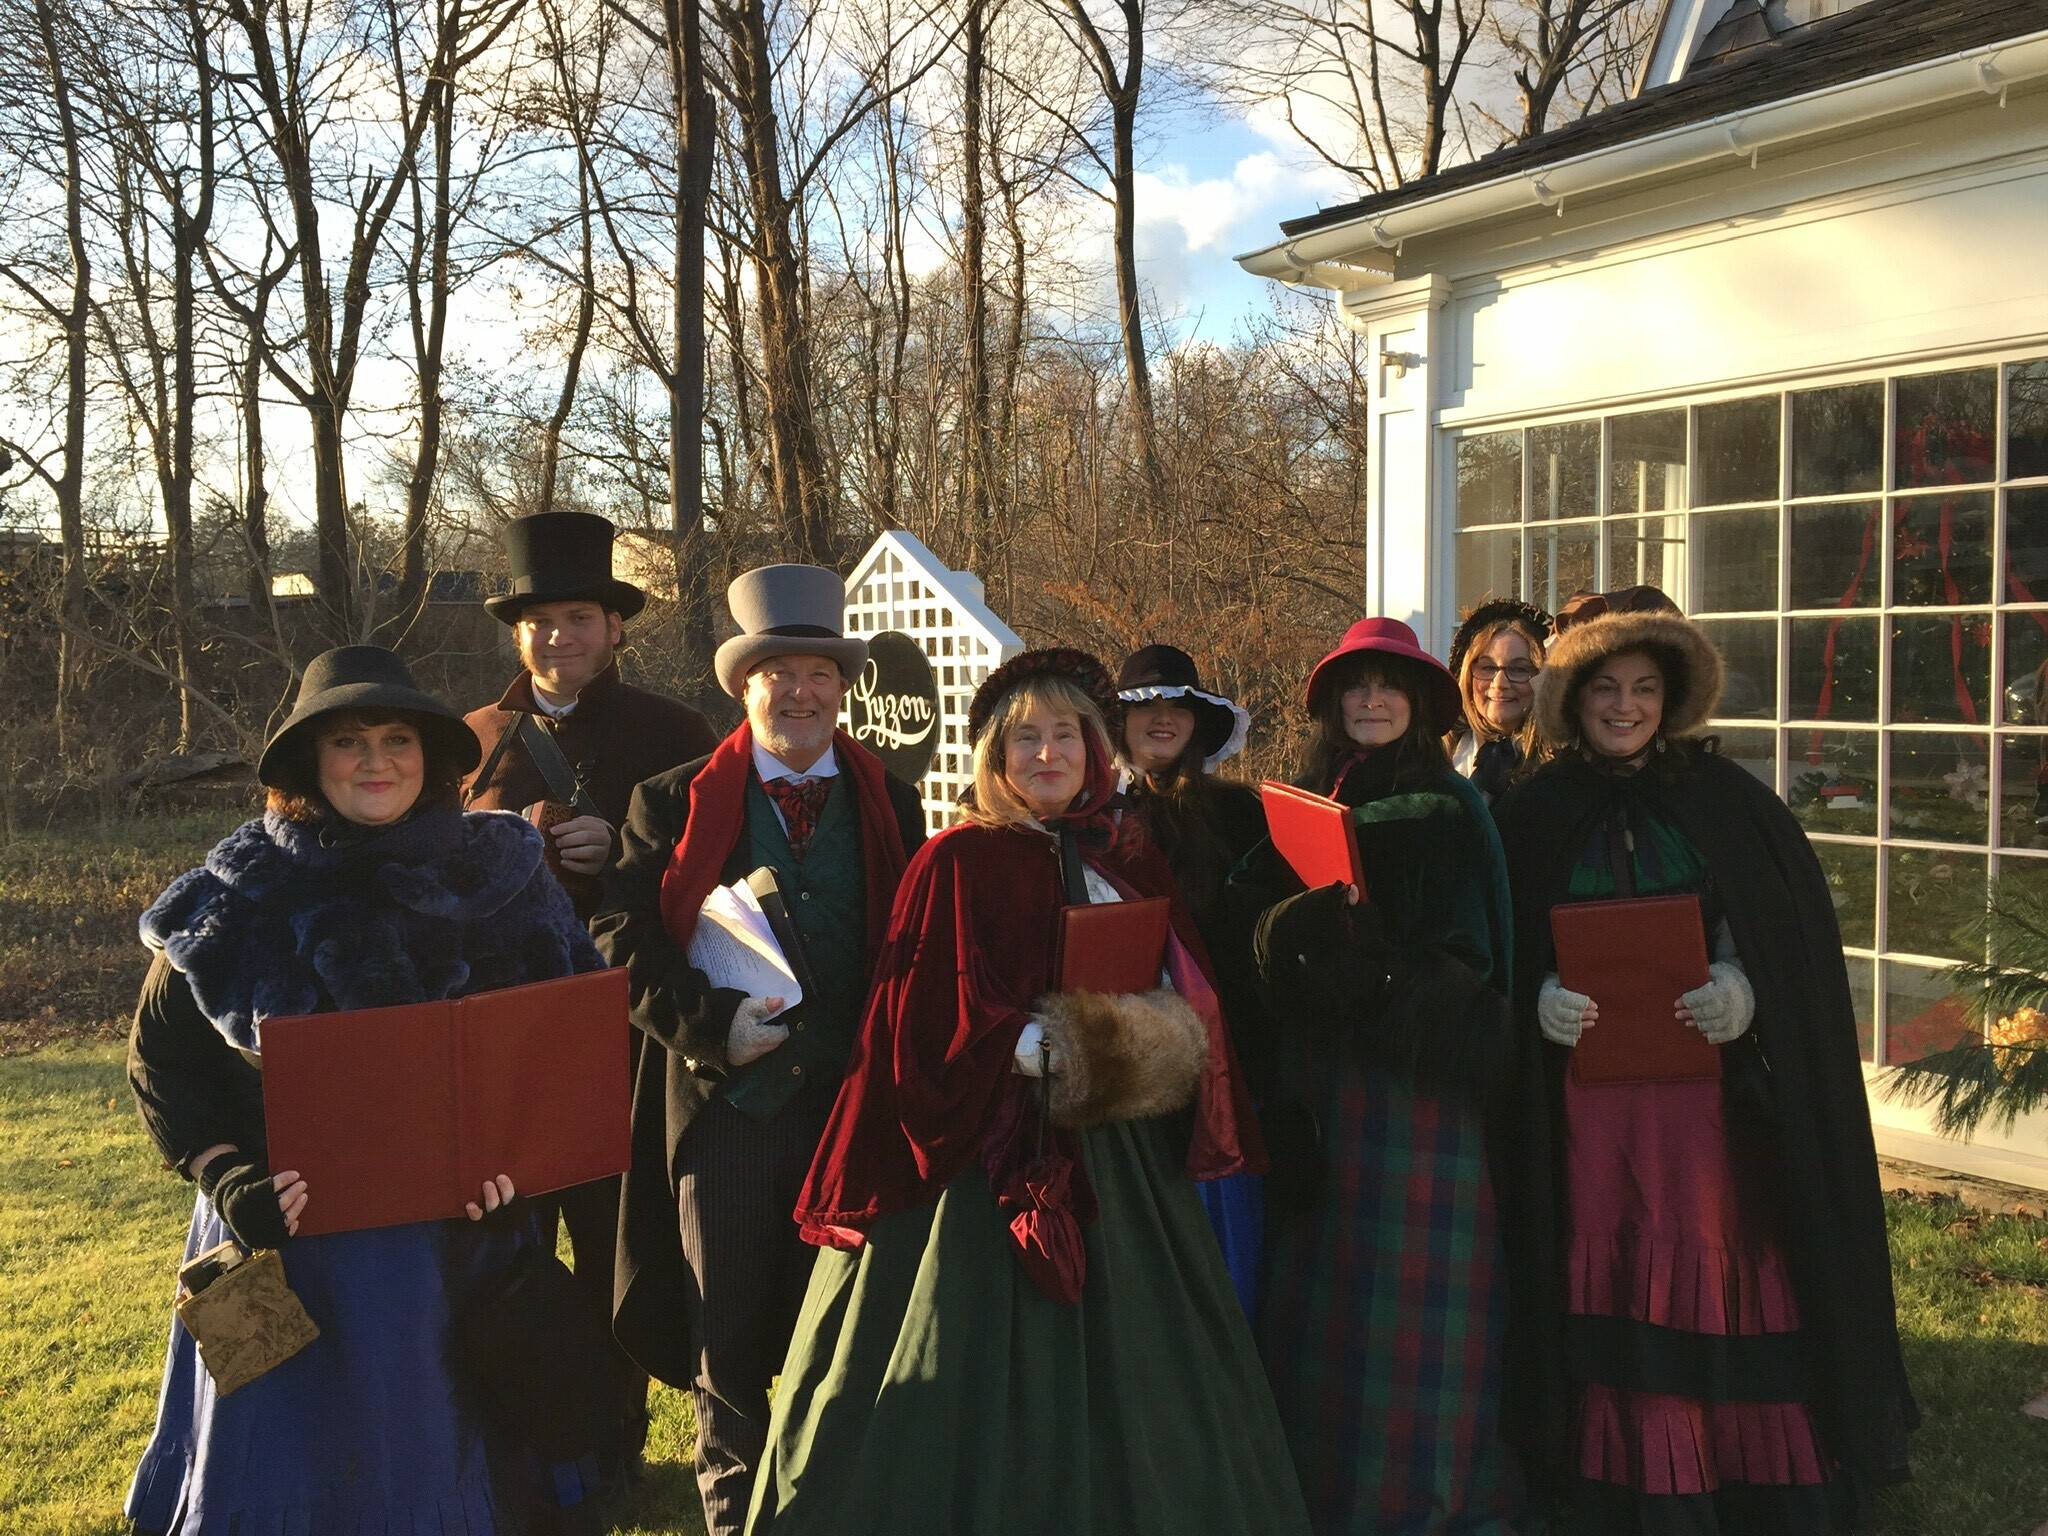 Bonnie Grice and The Dickens Carolers in previous years